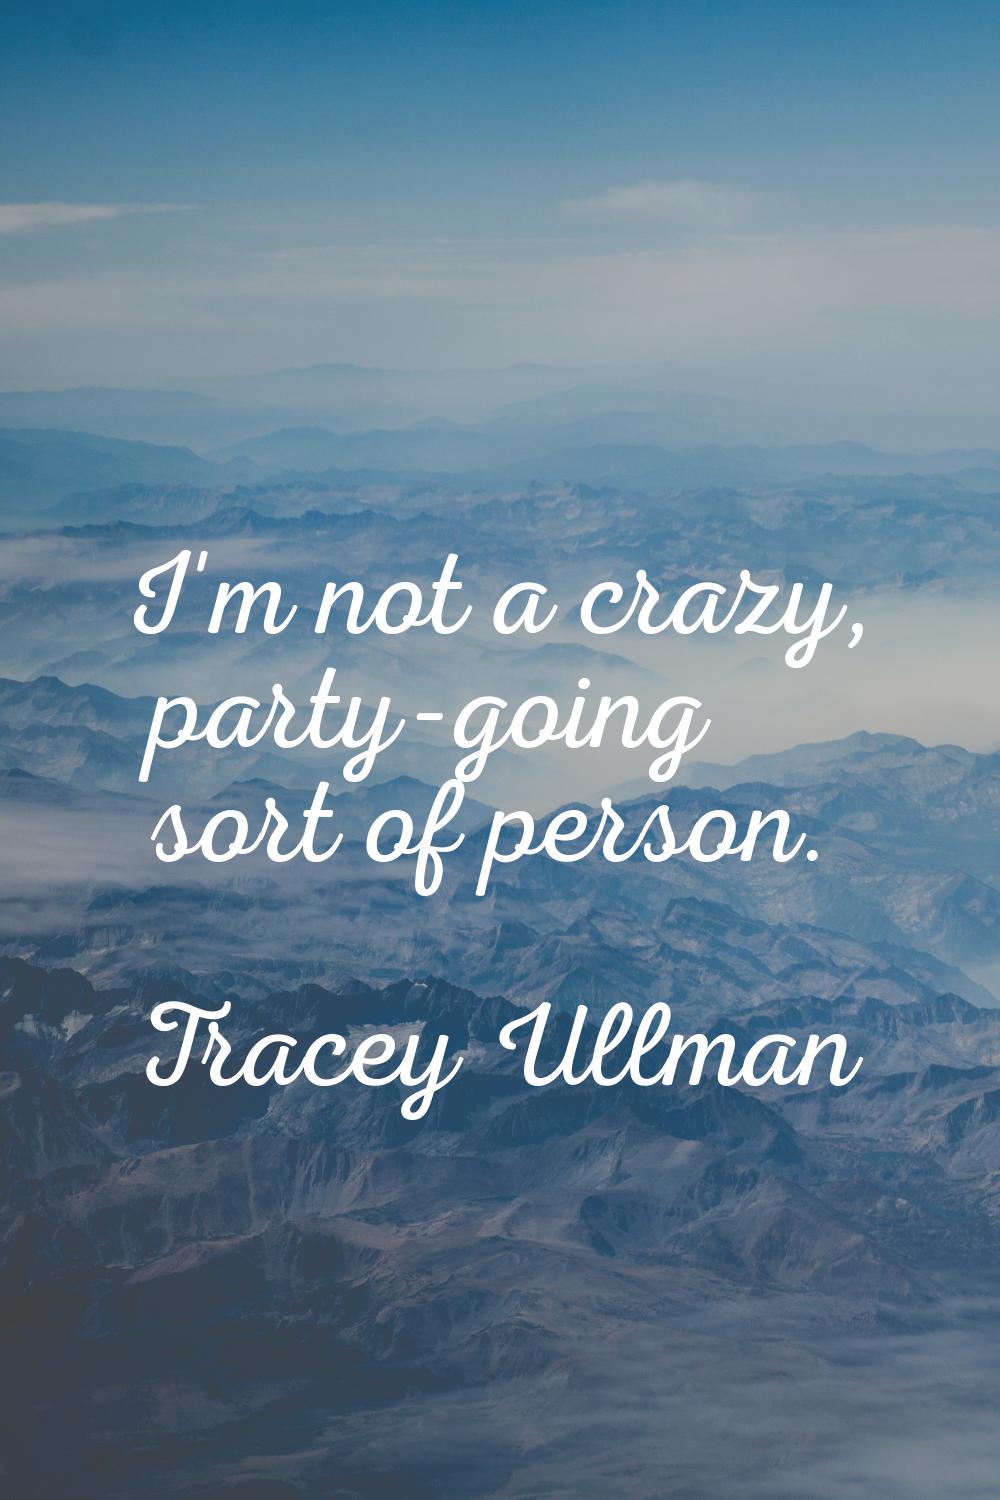 I'm not a crazy, party-going sort of person.